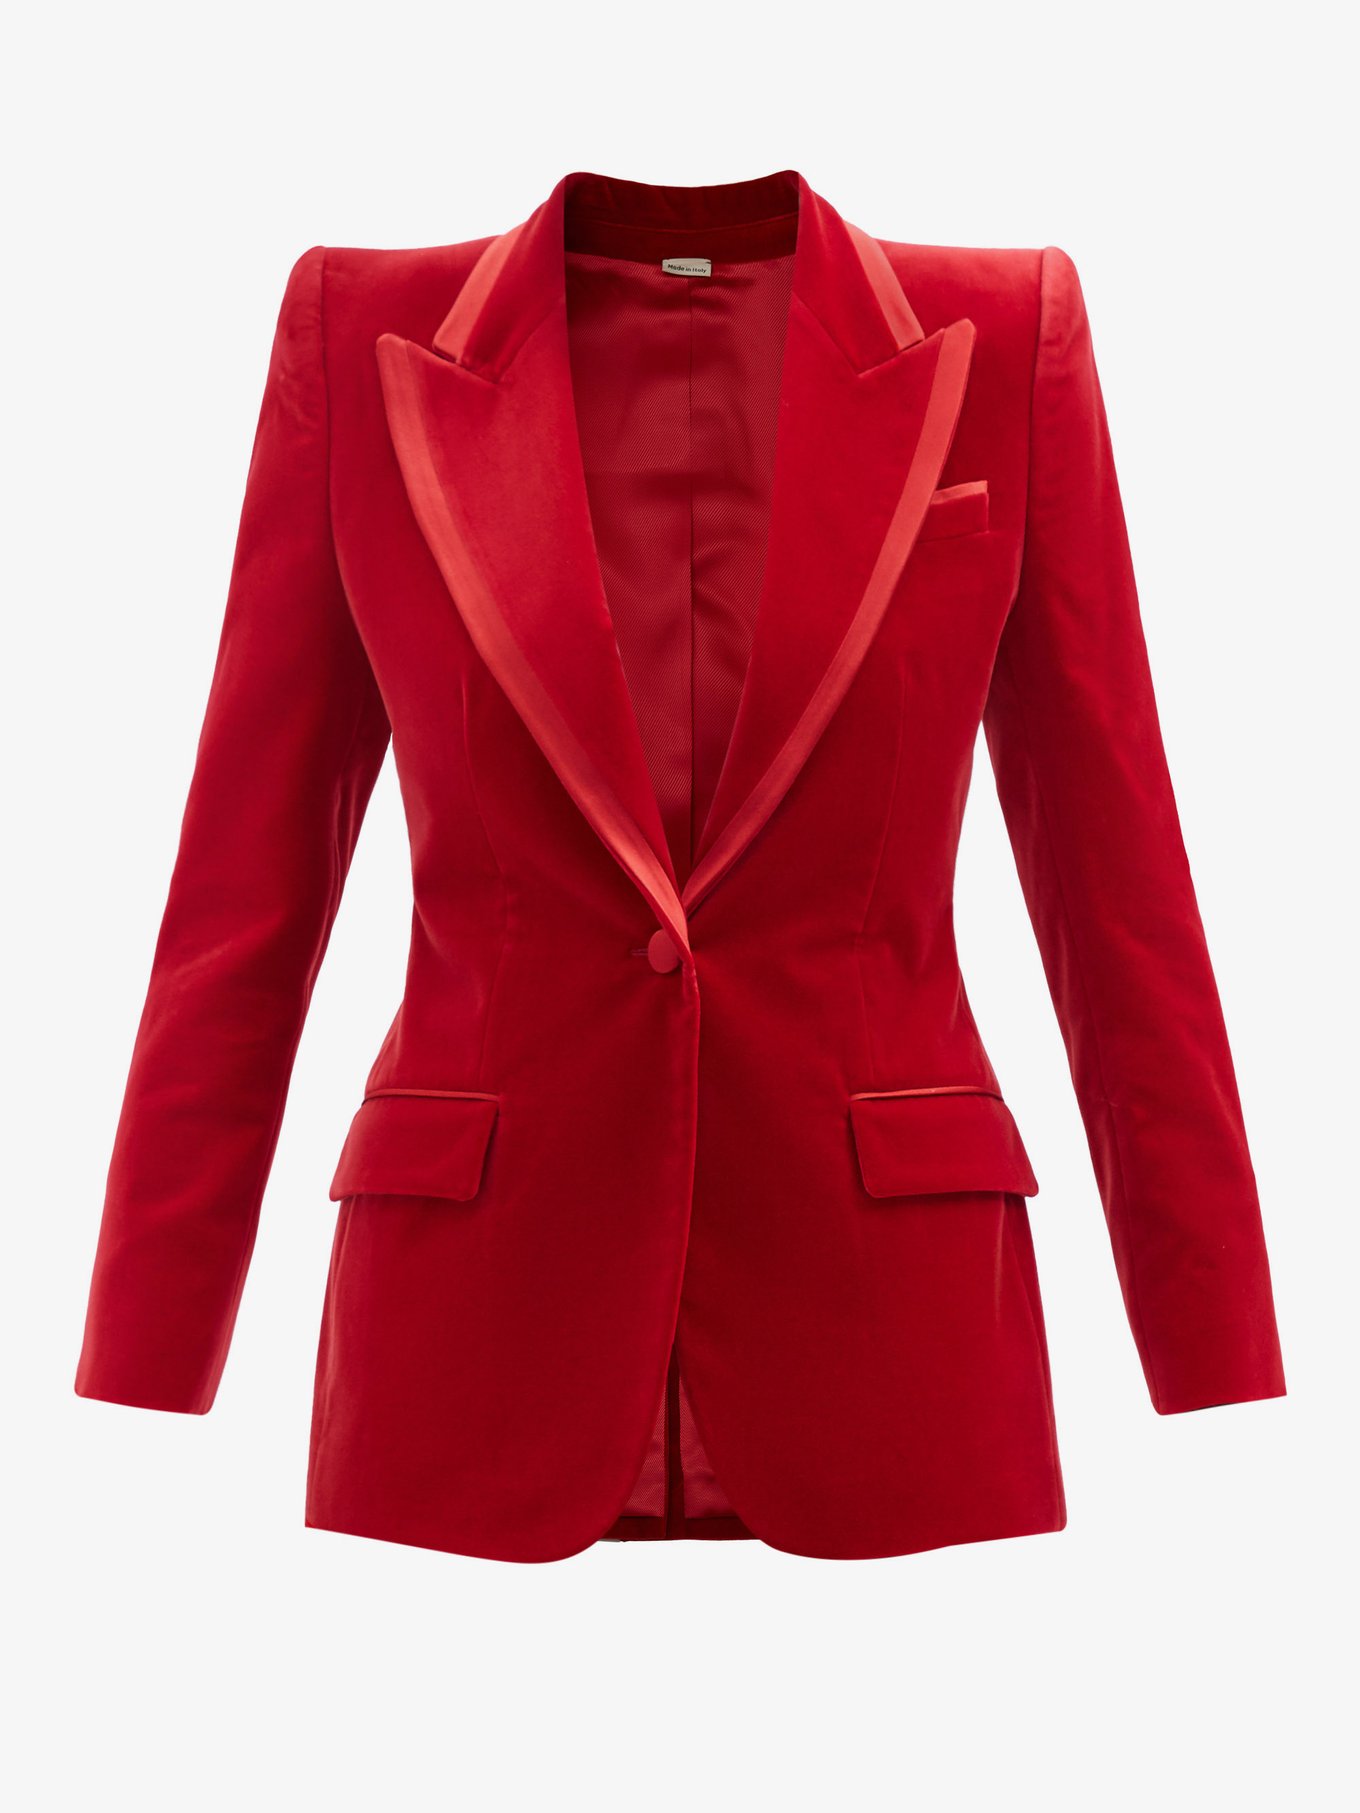 Red Single-breasted cotton-blend velvet suit jacket, Gucci